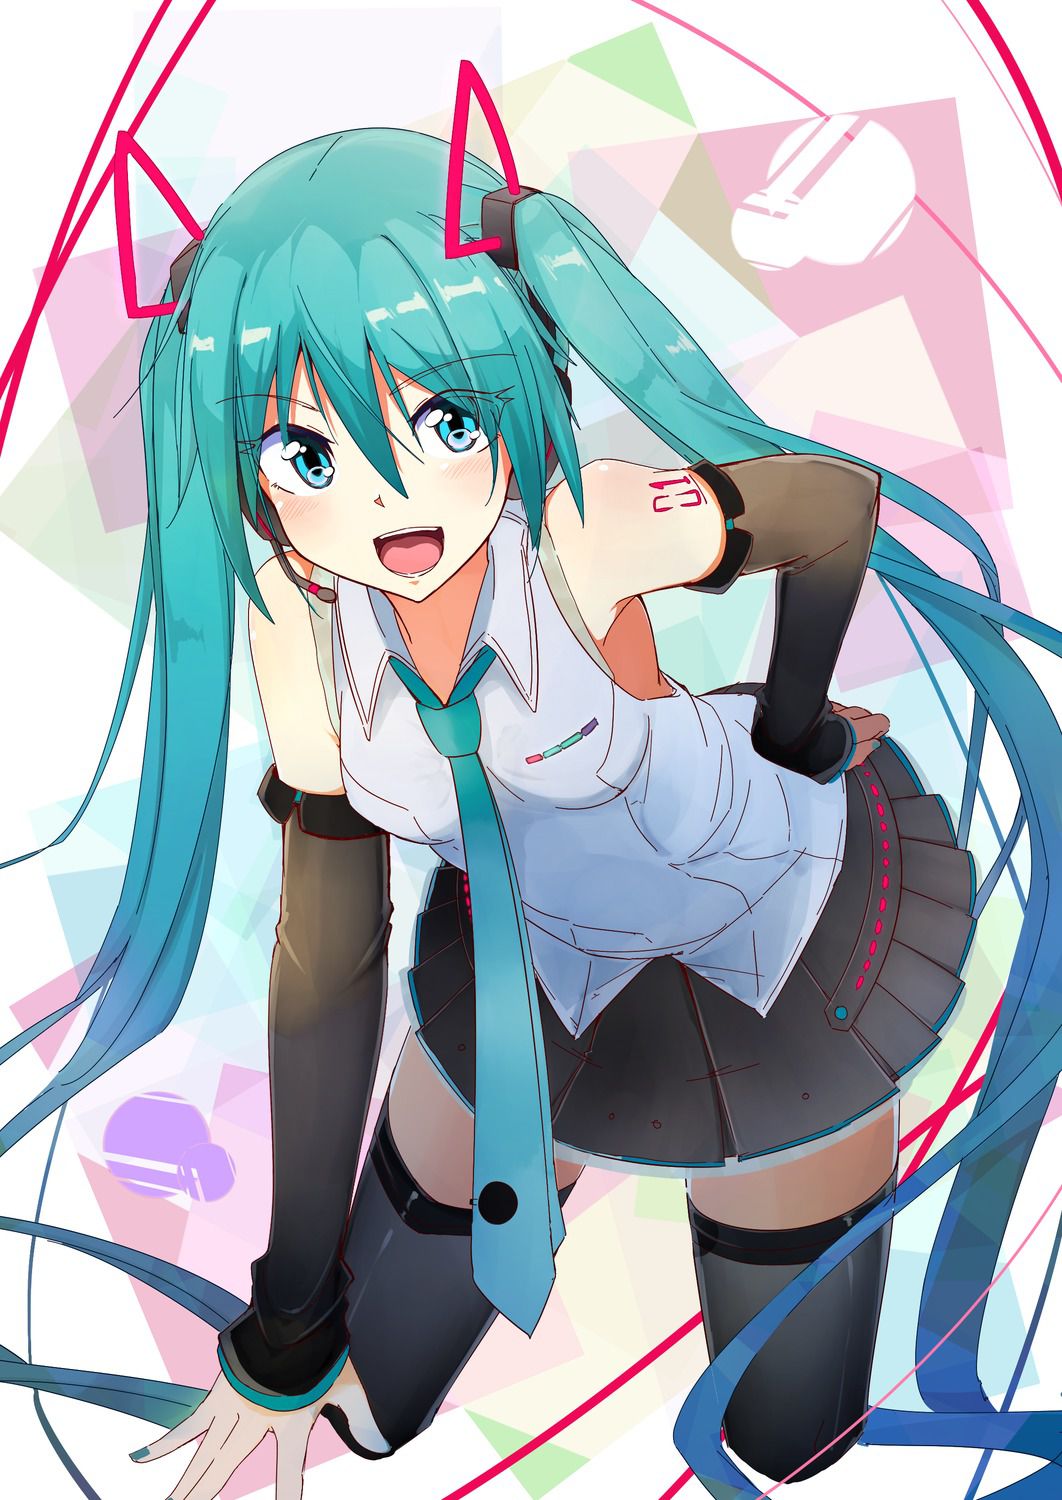 Hatsune miku is cute! Beautiful! With 10 images of miku! [Pictures and wallpapers] (Vocaloid VOCALOID 11) 2